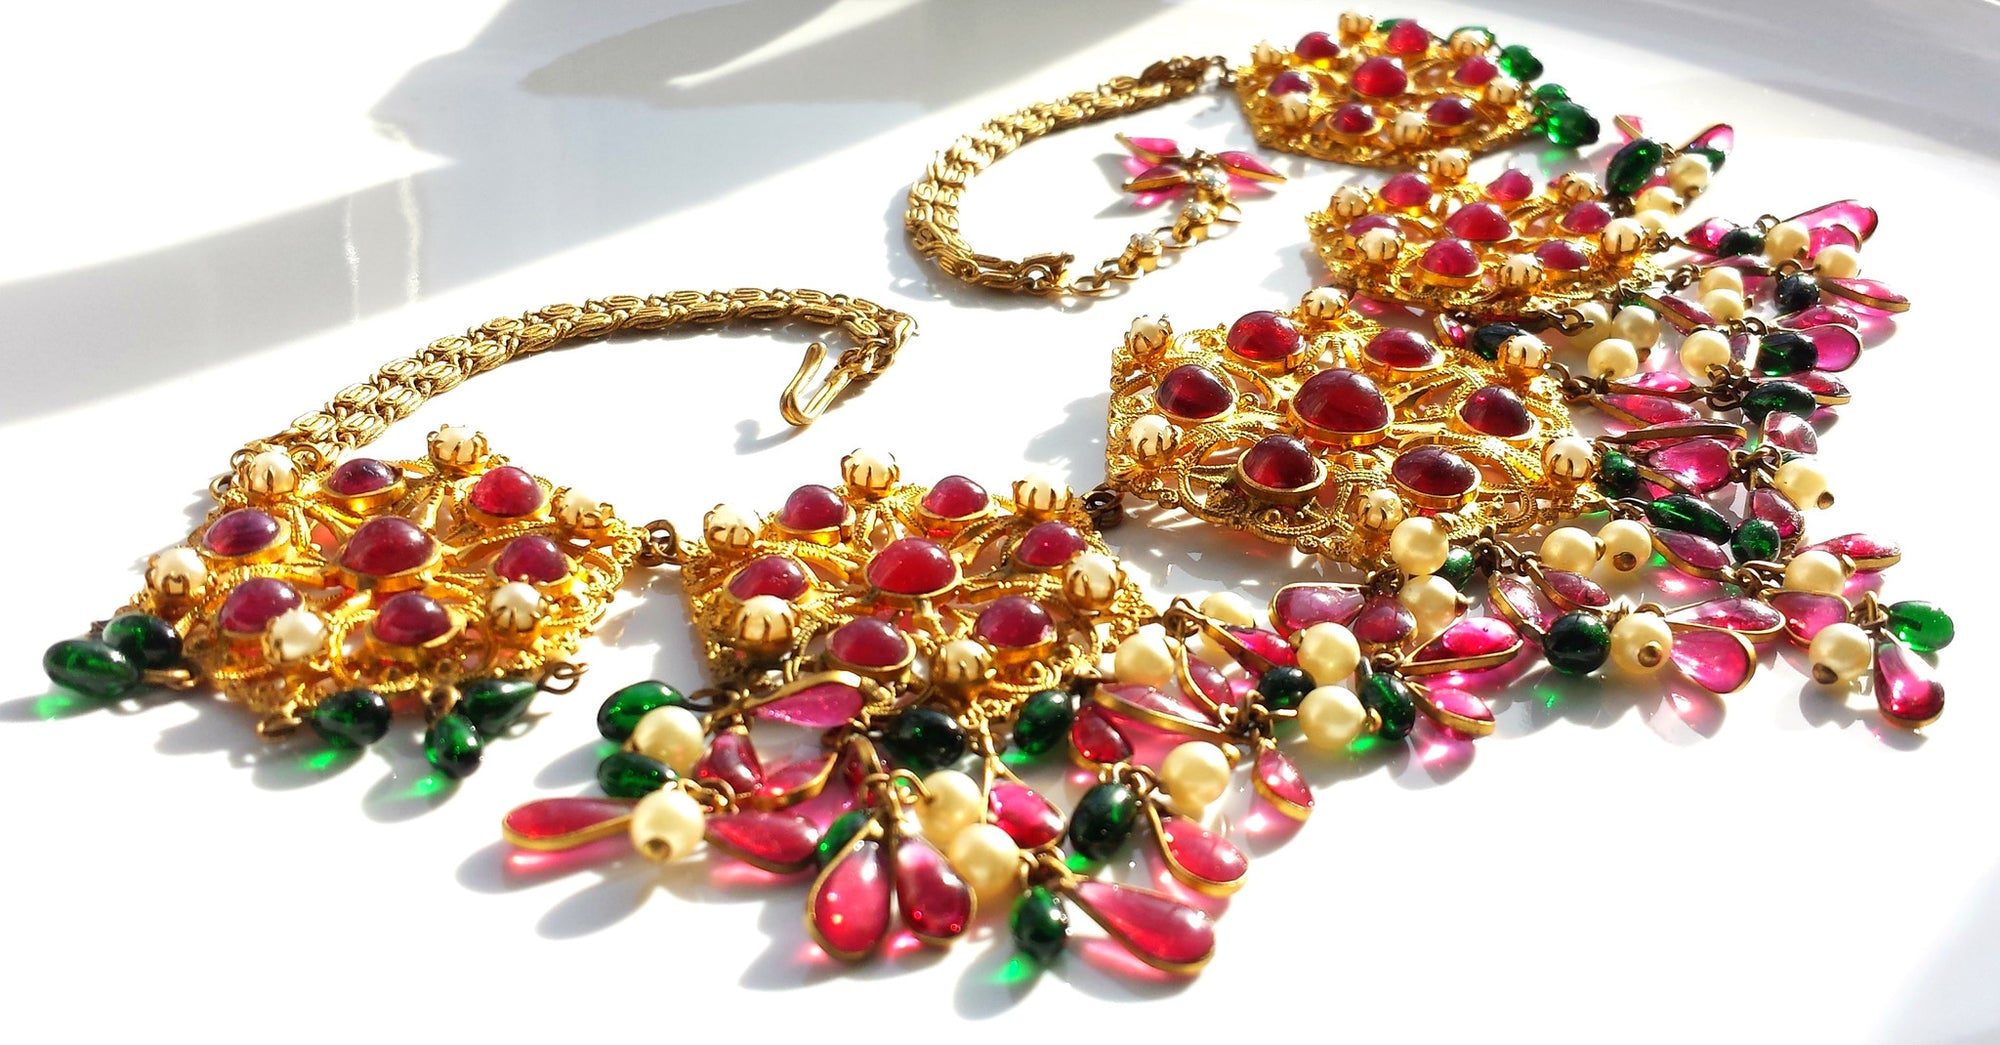 Important Vintage 1940s Chanel Gripoix Mughal/Moghul Ruby Emerald Pearl Necklace